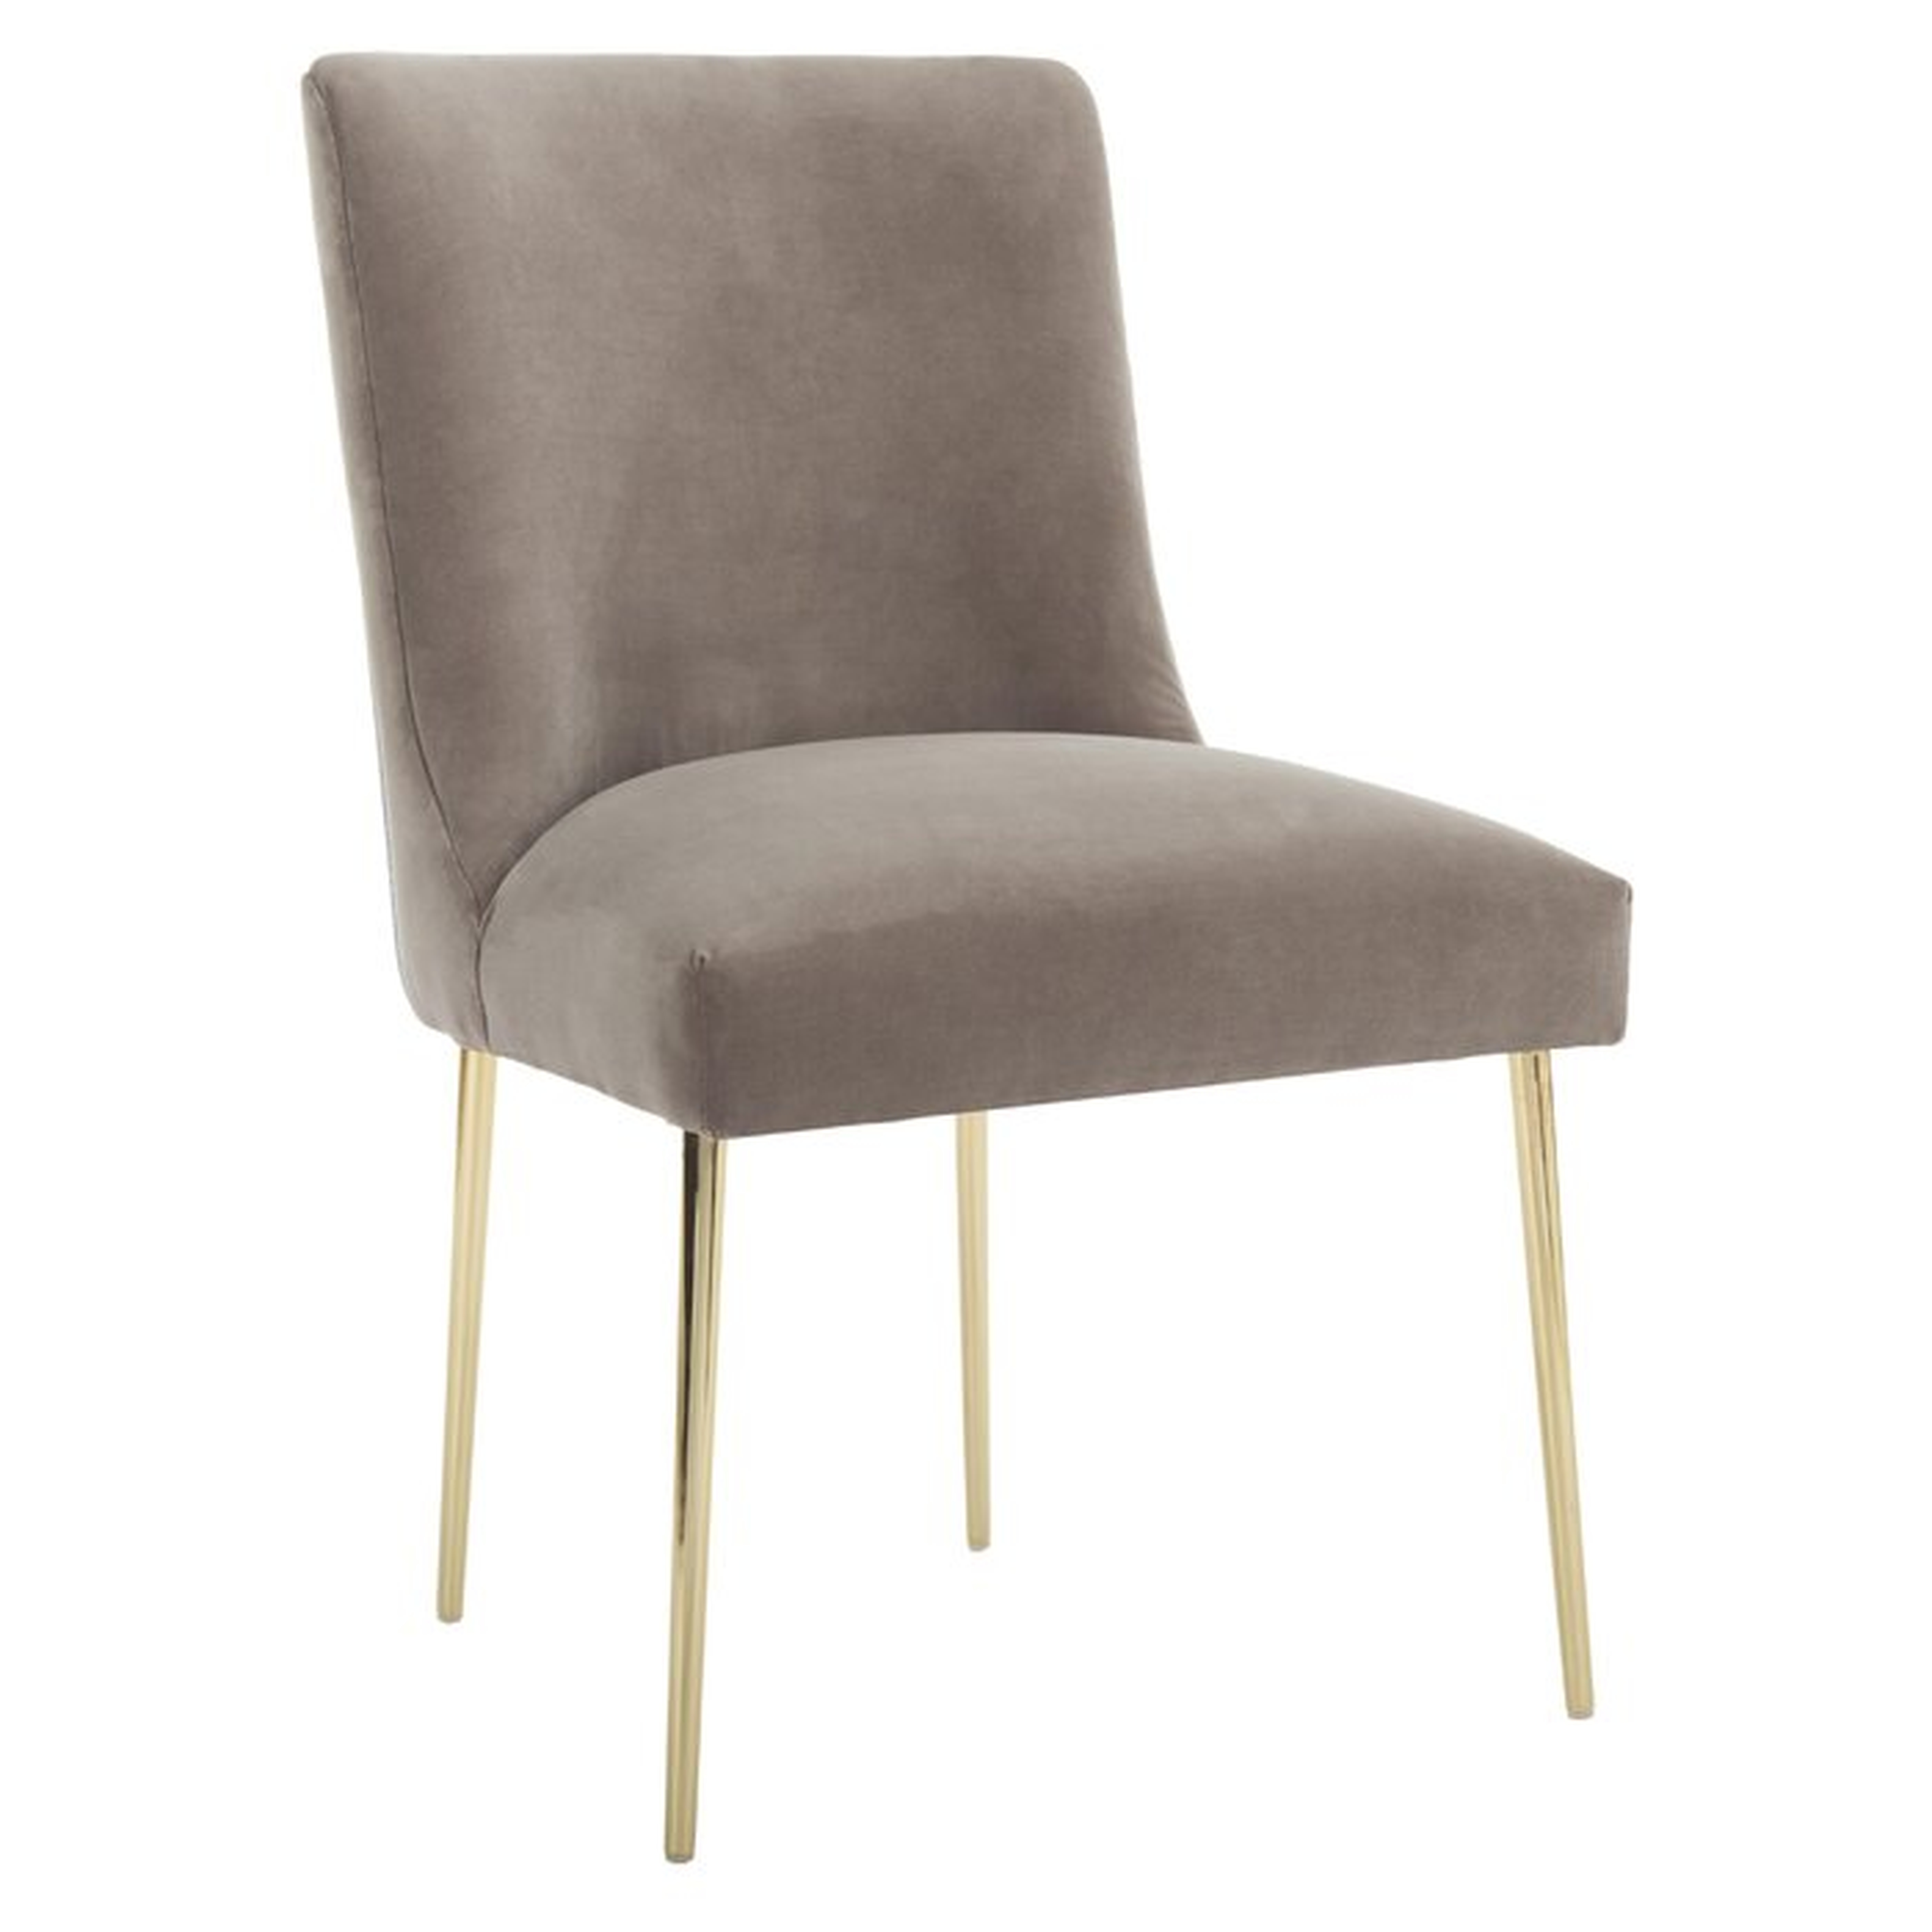 NOLITA UPHOLSTERED DINING CHAIR - Perigold